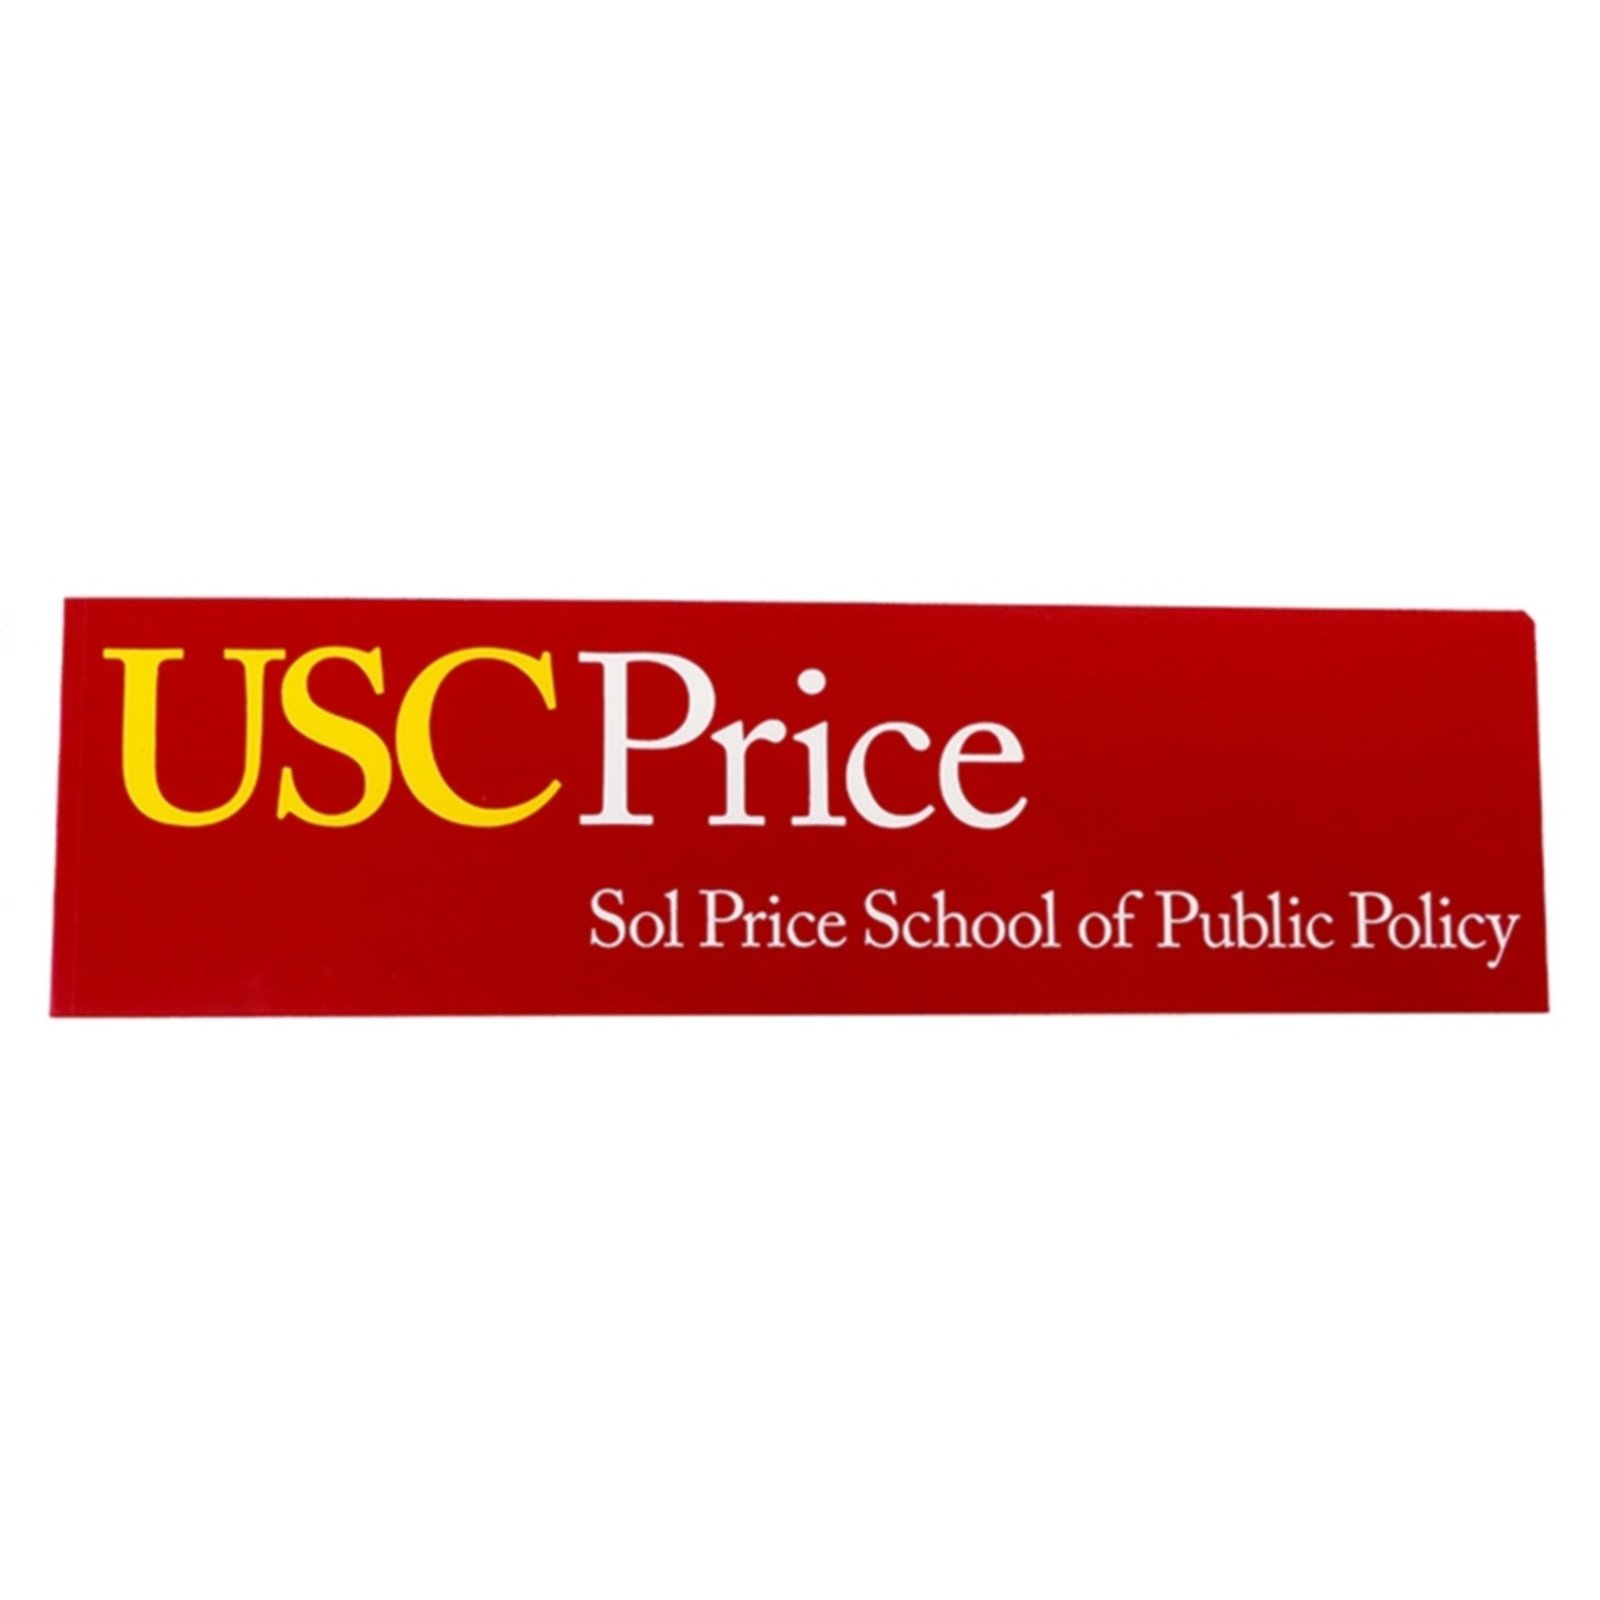 USC Sol Price School of Public Policy Decal image01